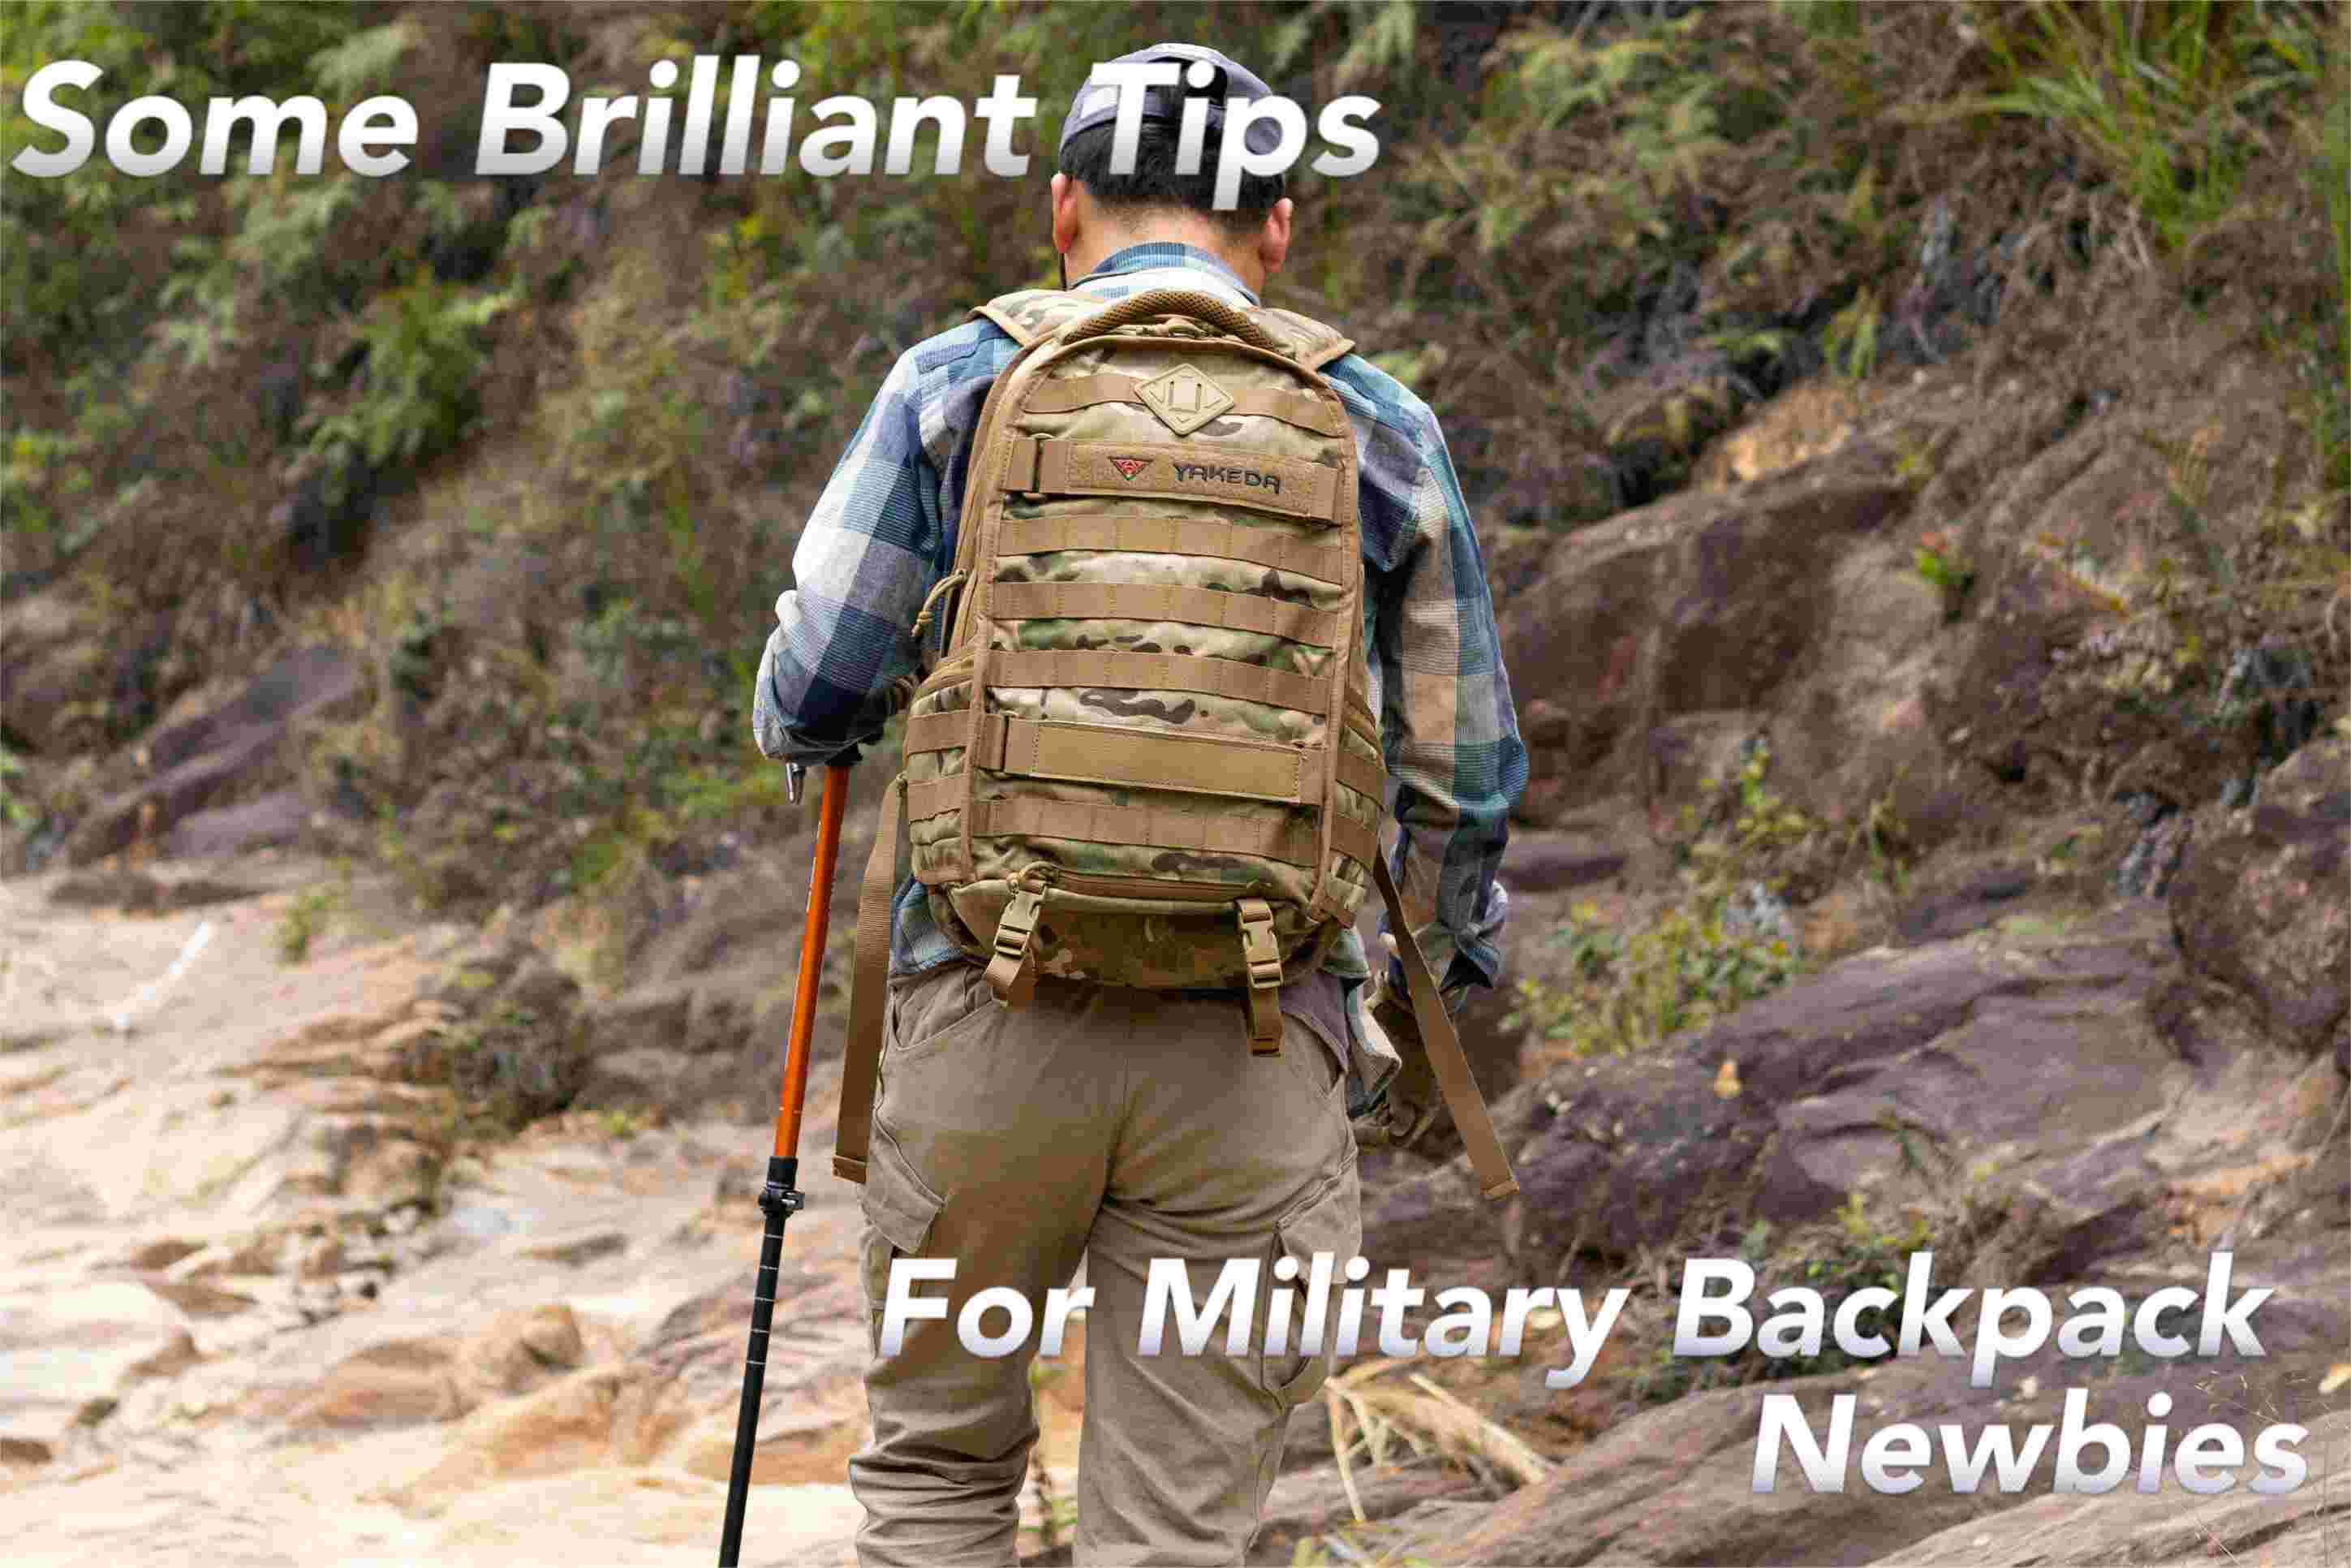 Some Brilliant Tips for Military Backpack Newbies